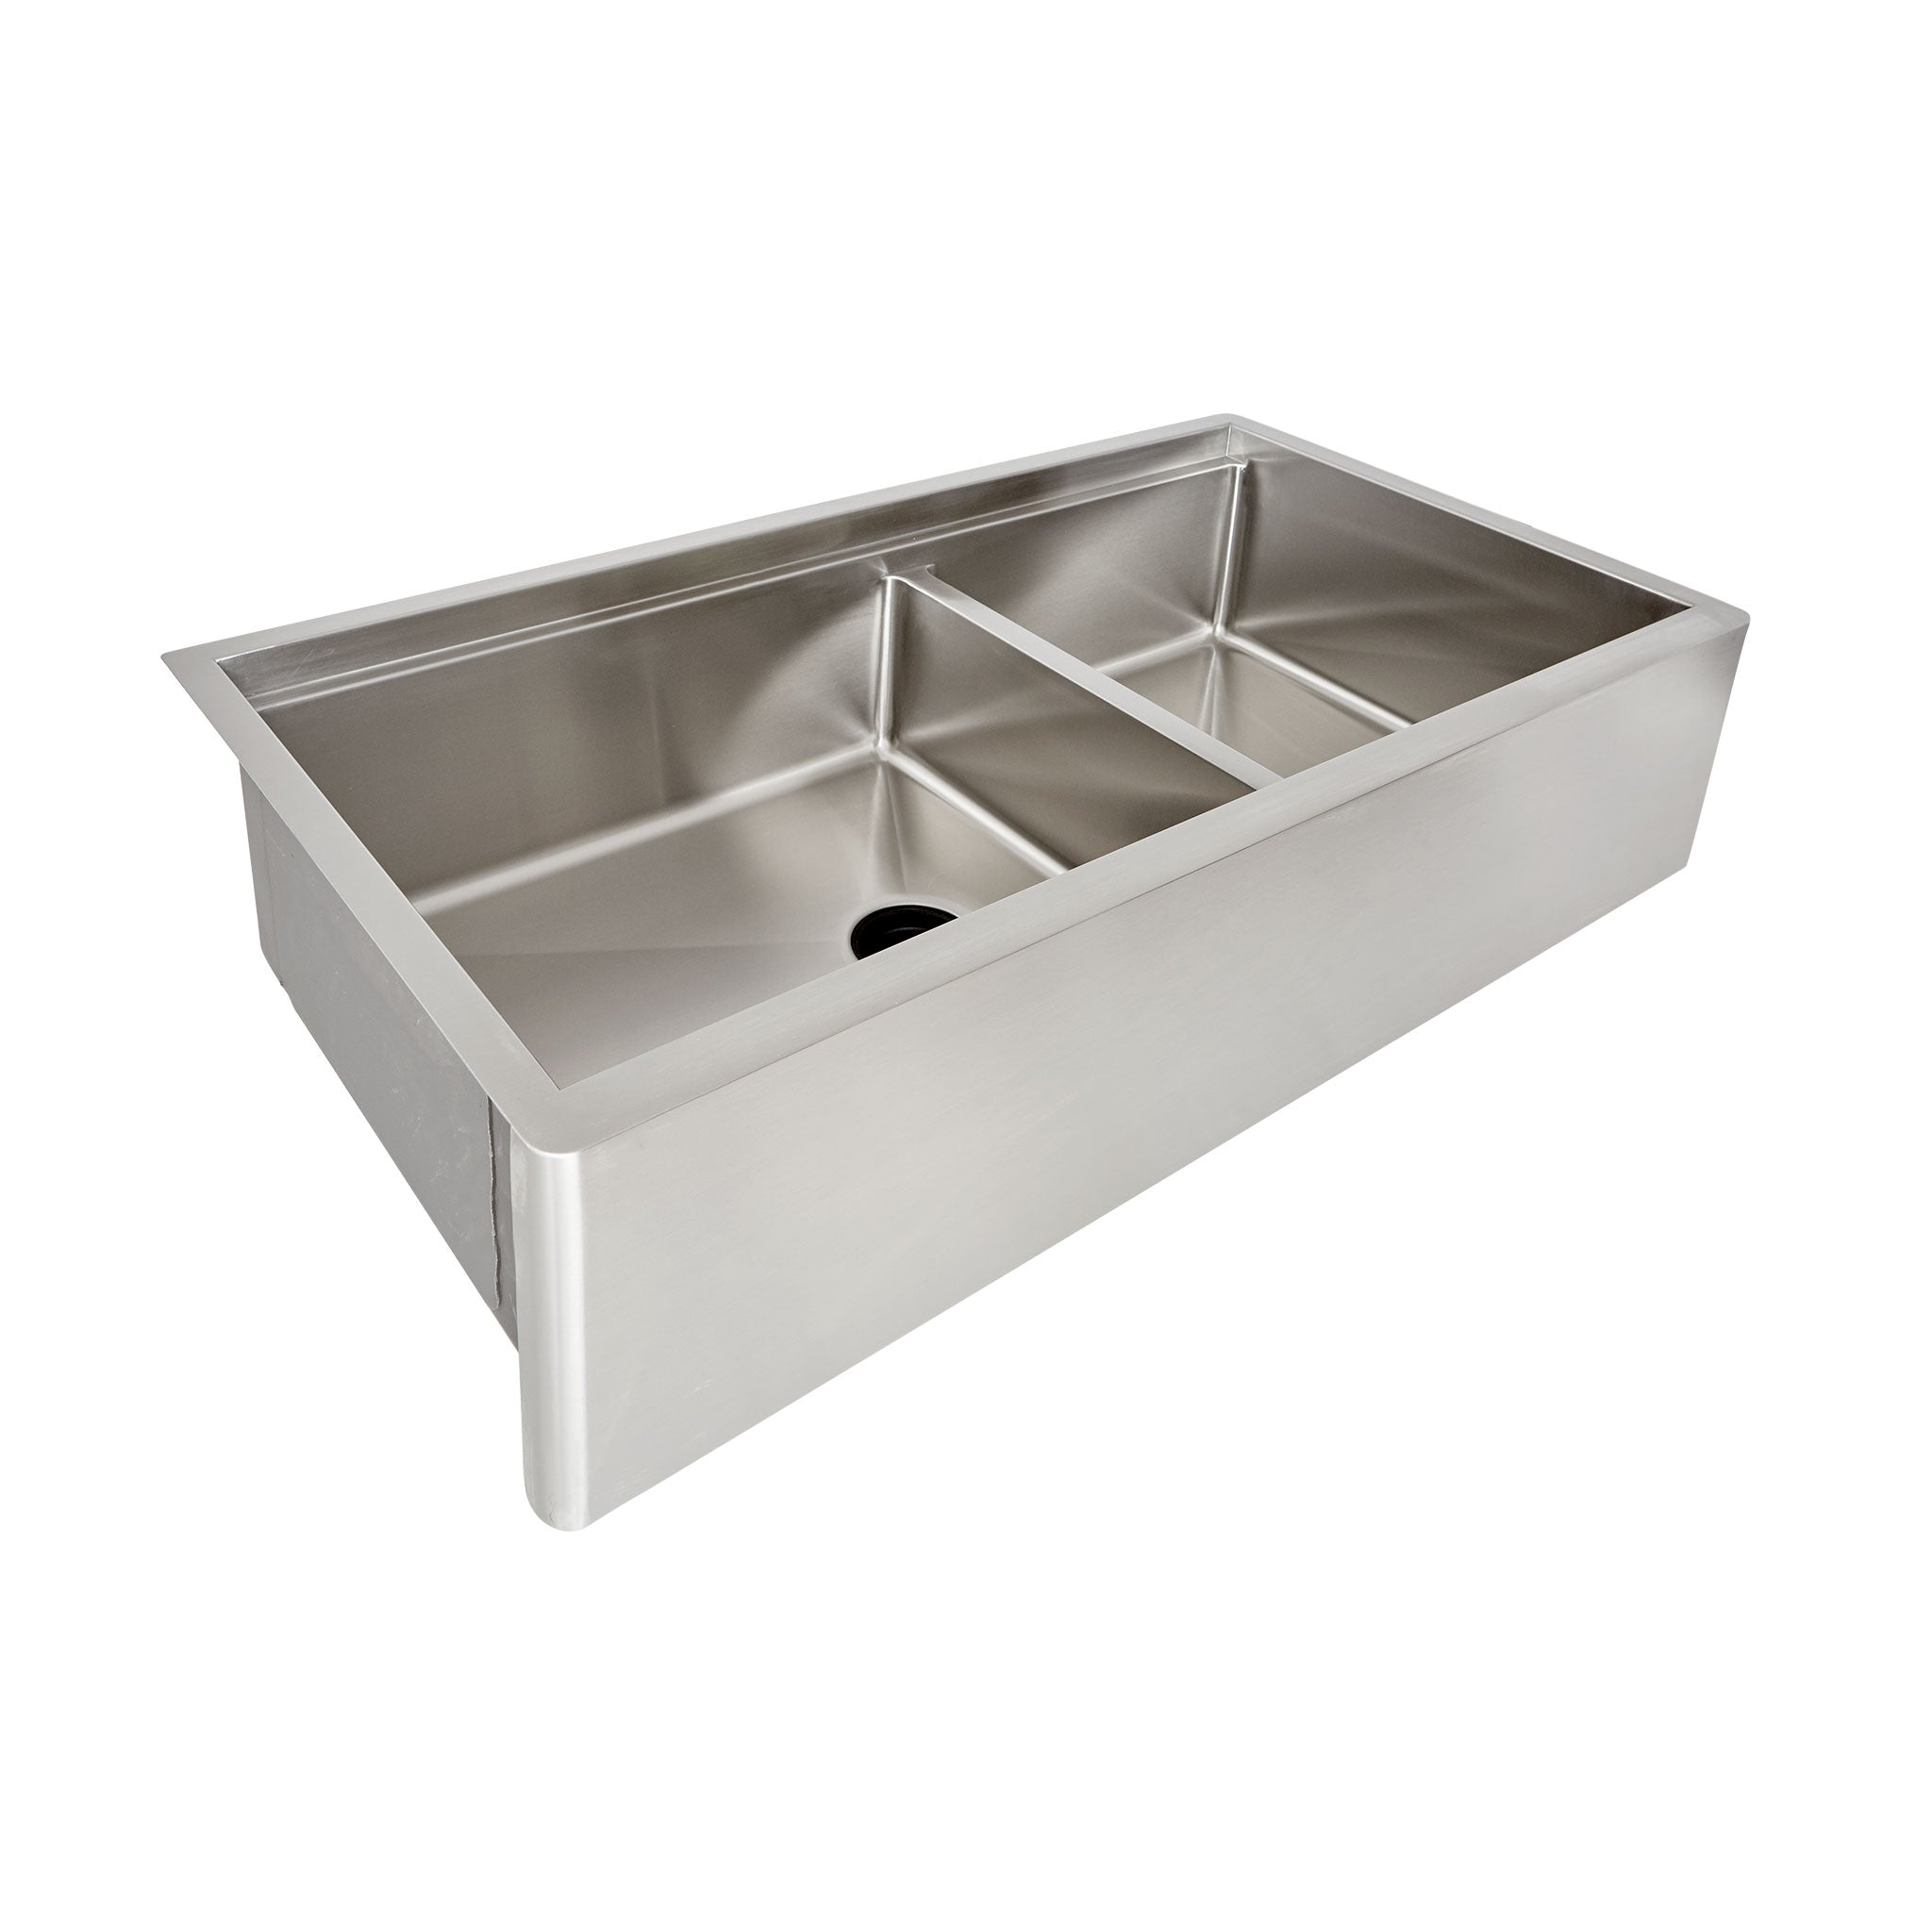 36 inch undermount stainless steel double bowl apron front sink